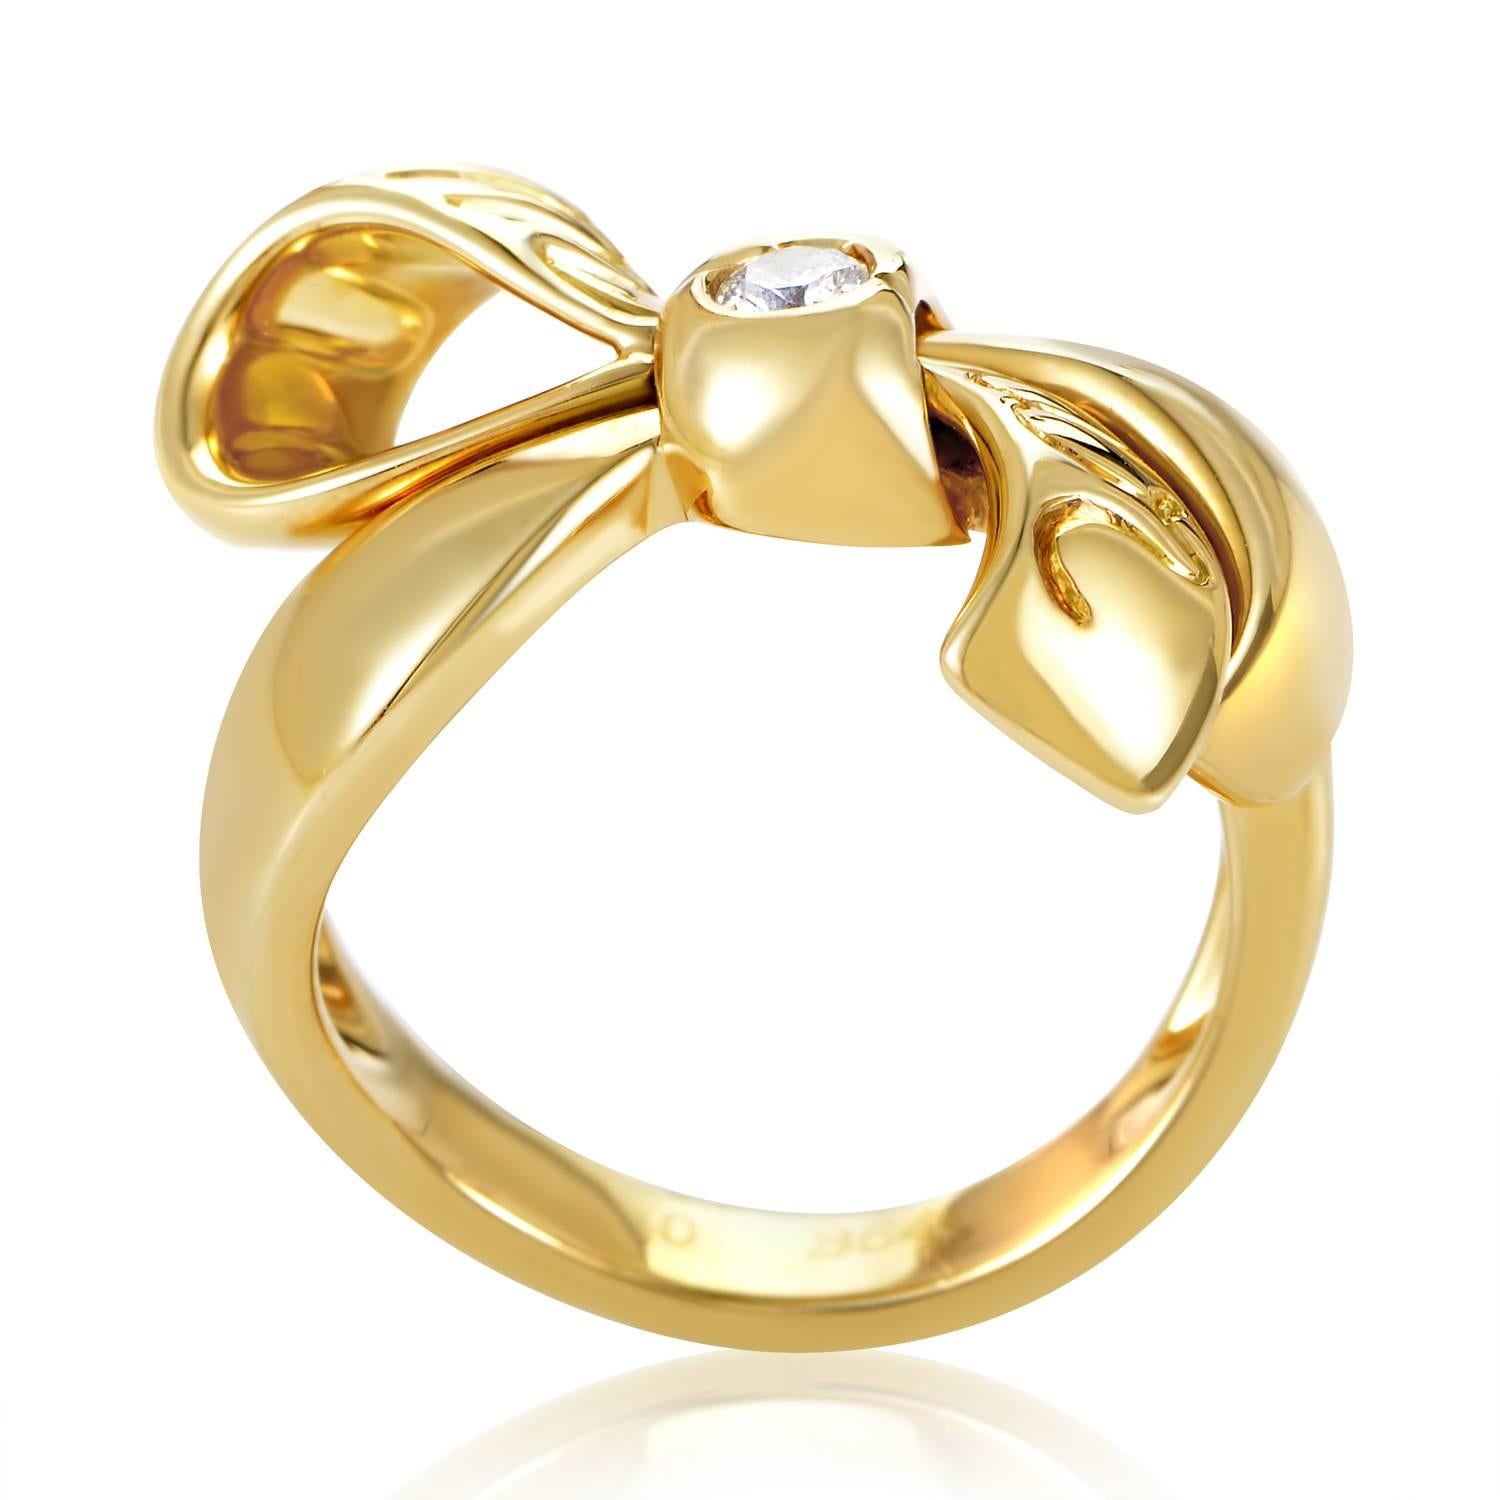 The adorable design of this dainty golden ring from Dior is sure to please. Forged from 18K yellow gold into the design of a delicate bow, the ring's only adornment is a single .10ct diamond.
Ring Size: 6.25
Ring Top Dimensions: 20 x 7mm
Band